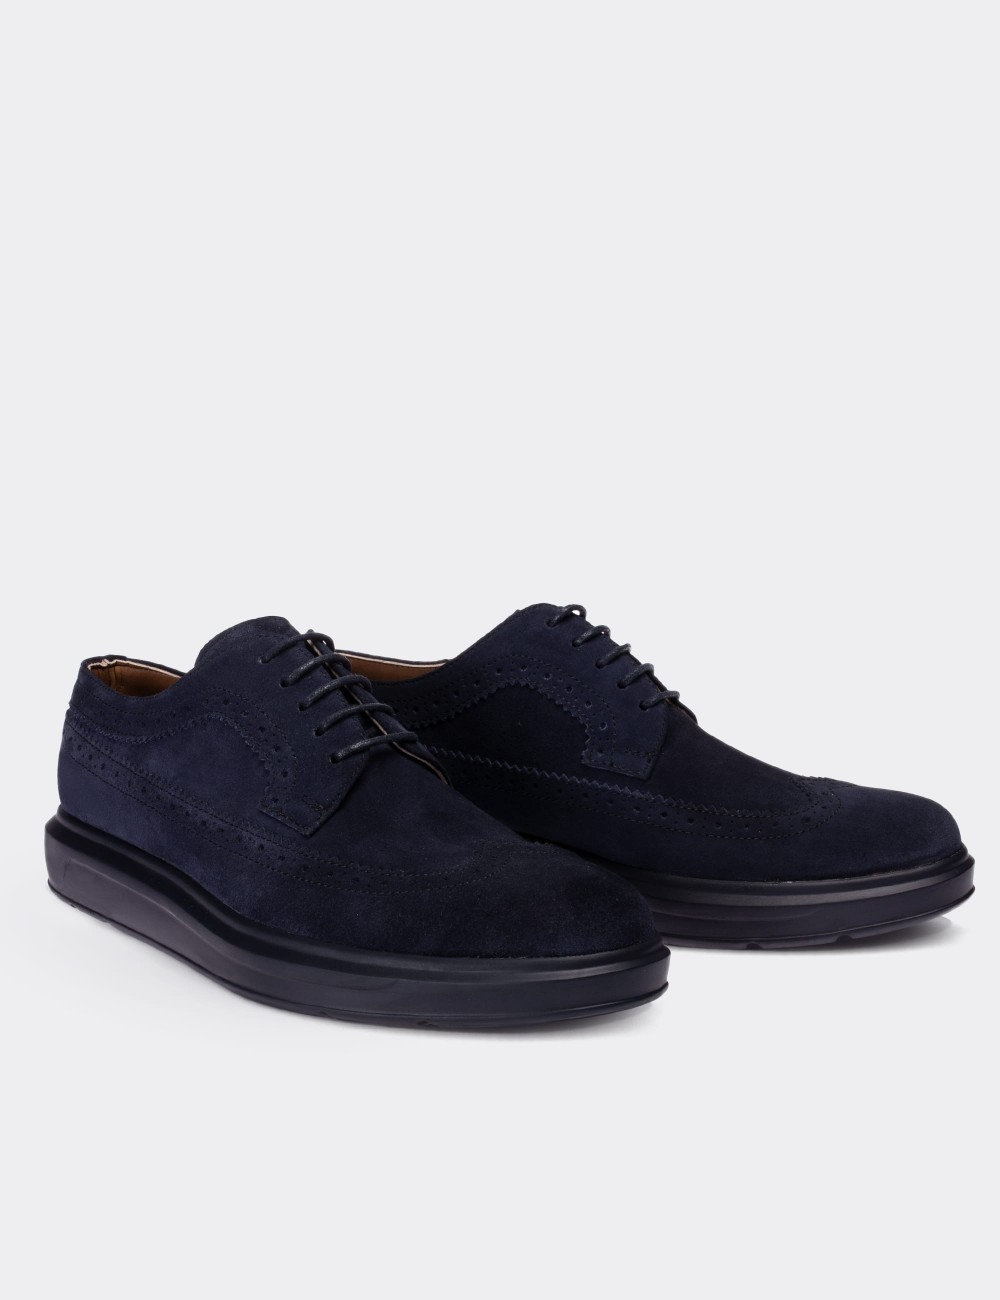 Blue Suede Leather Lace-up Shoes - 01293MMVIP06